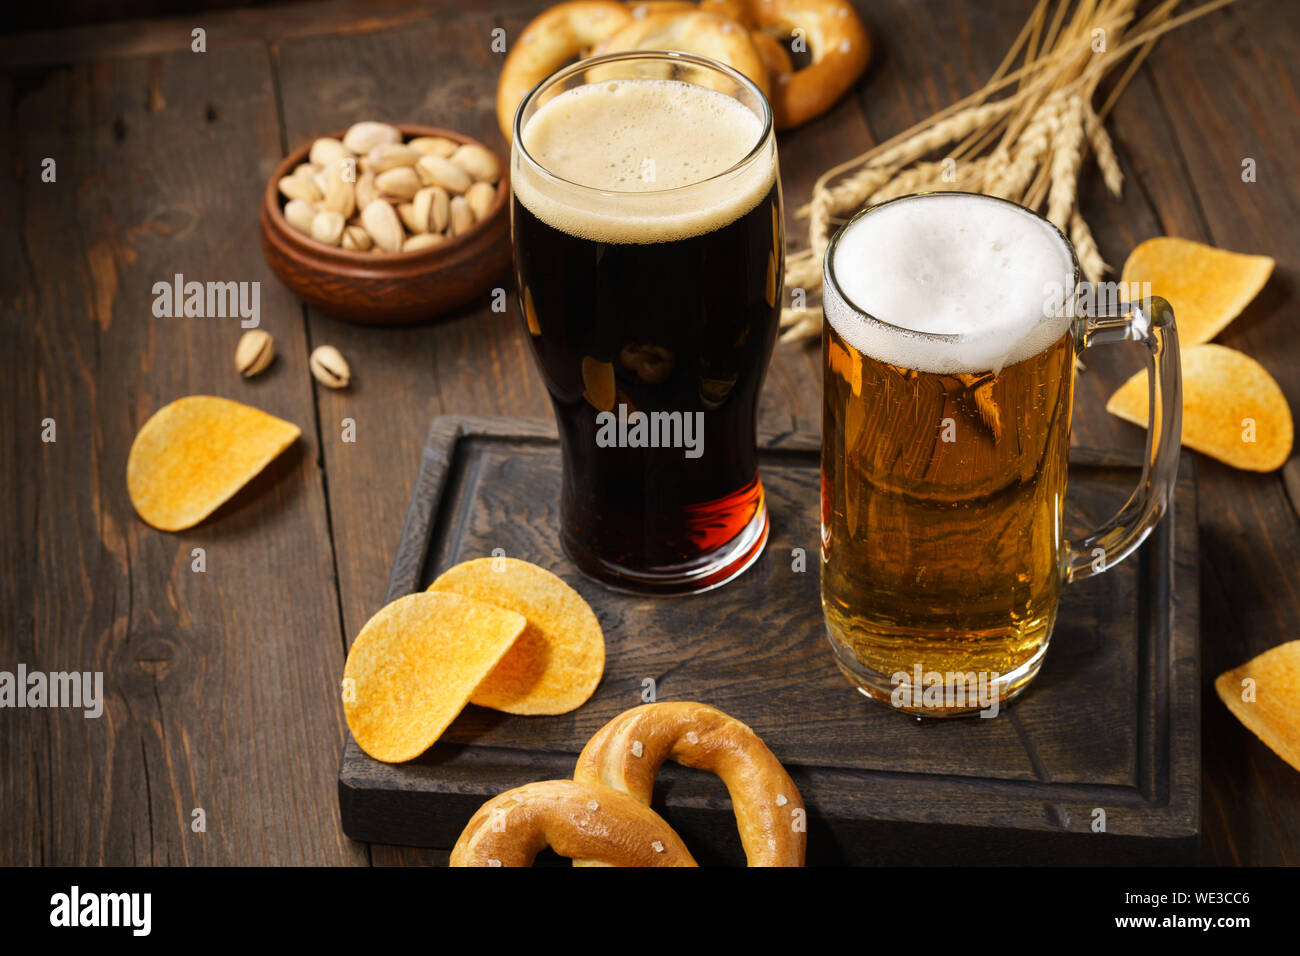 Light and dark beer with various snacks - chips, pretzels and nuts on a dark wooden background. Copy space. Stock Photo